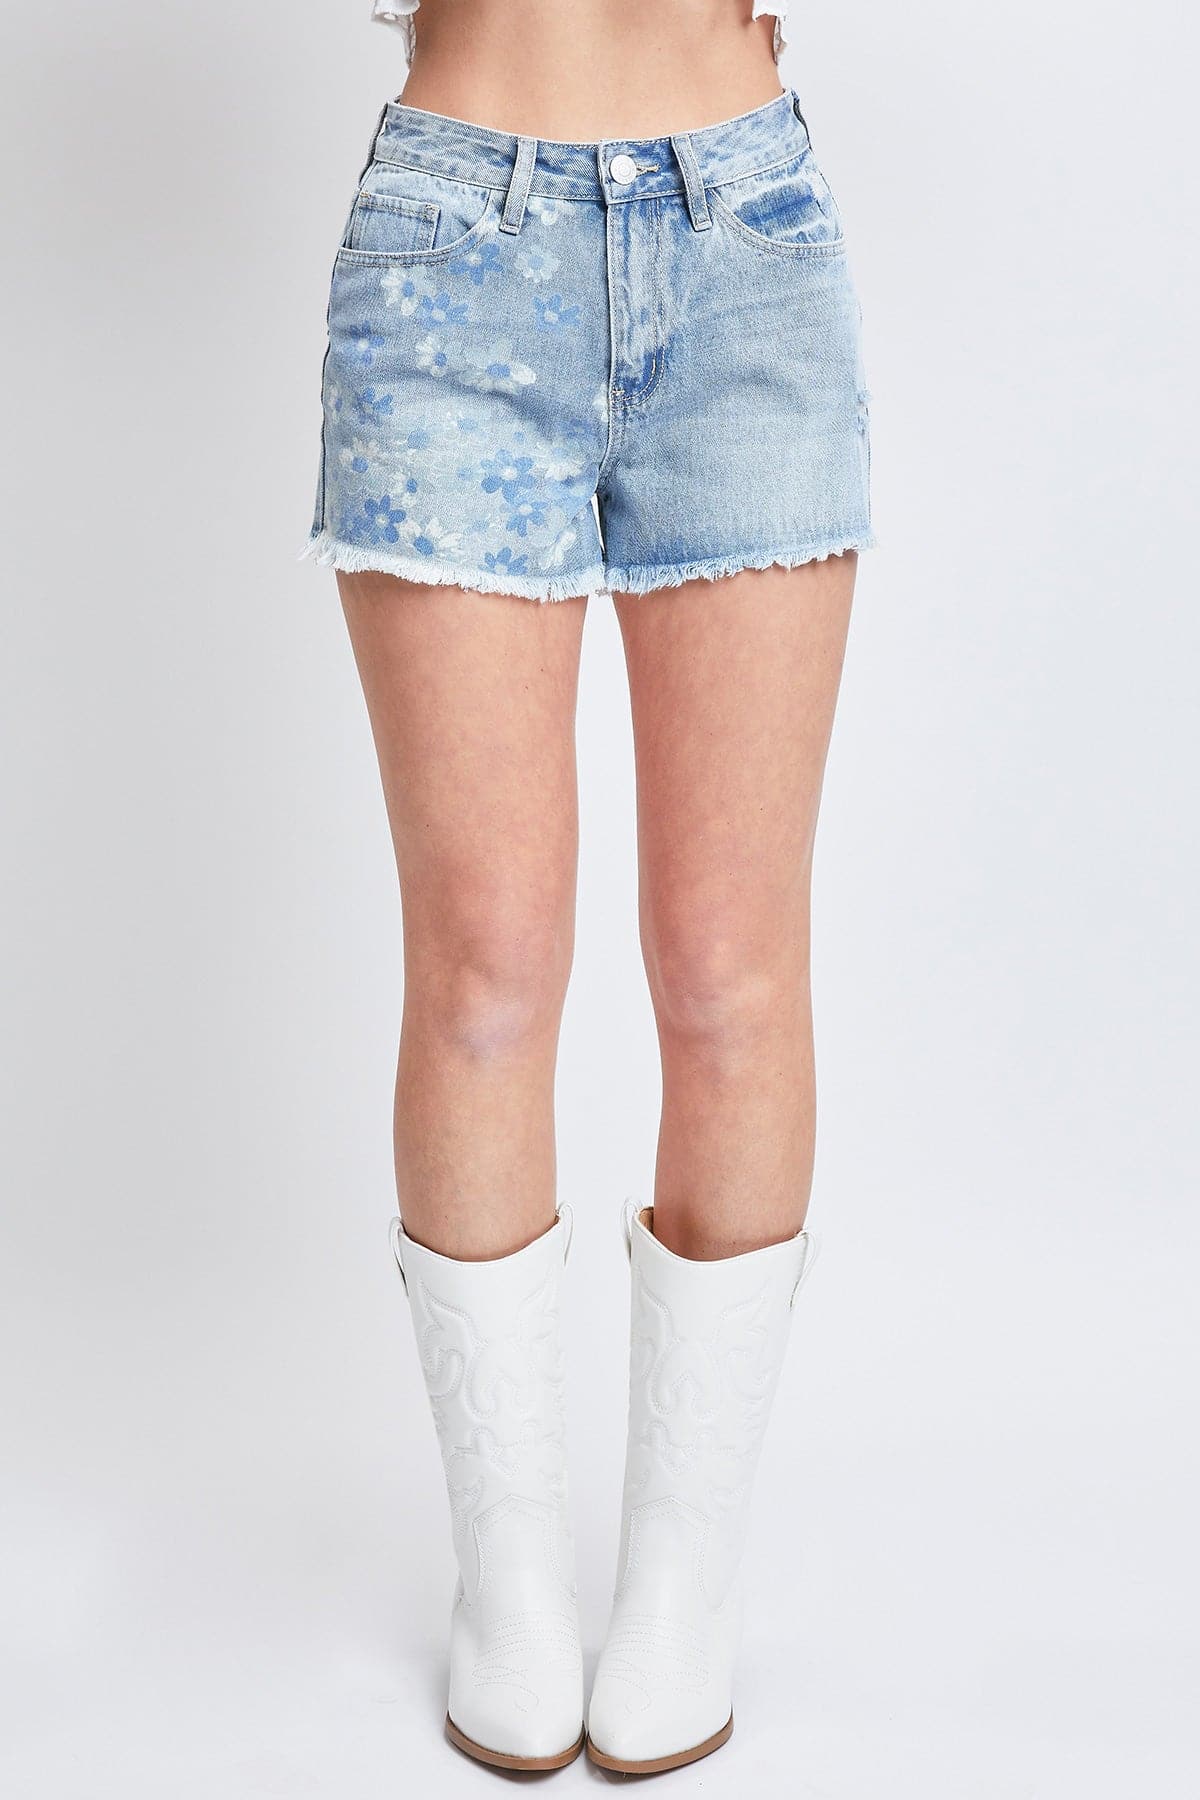 Women's High-Rise Denim Shorts with Floral Print